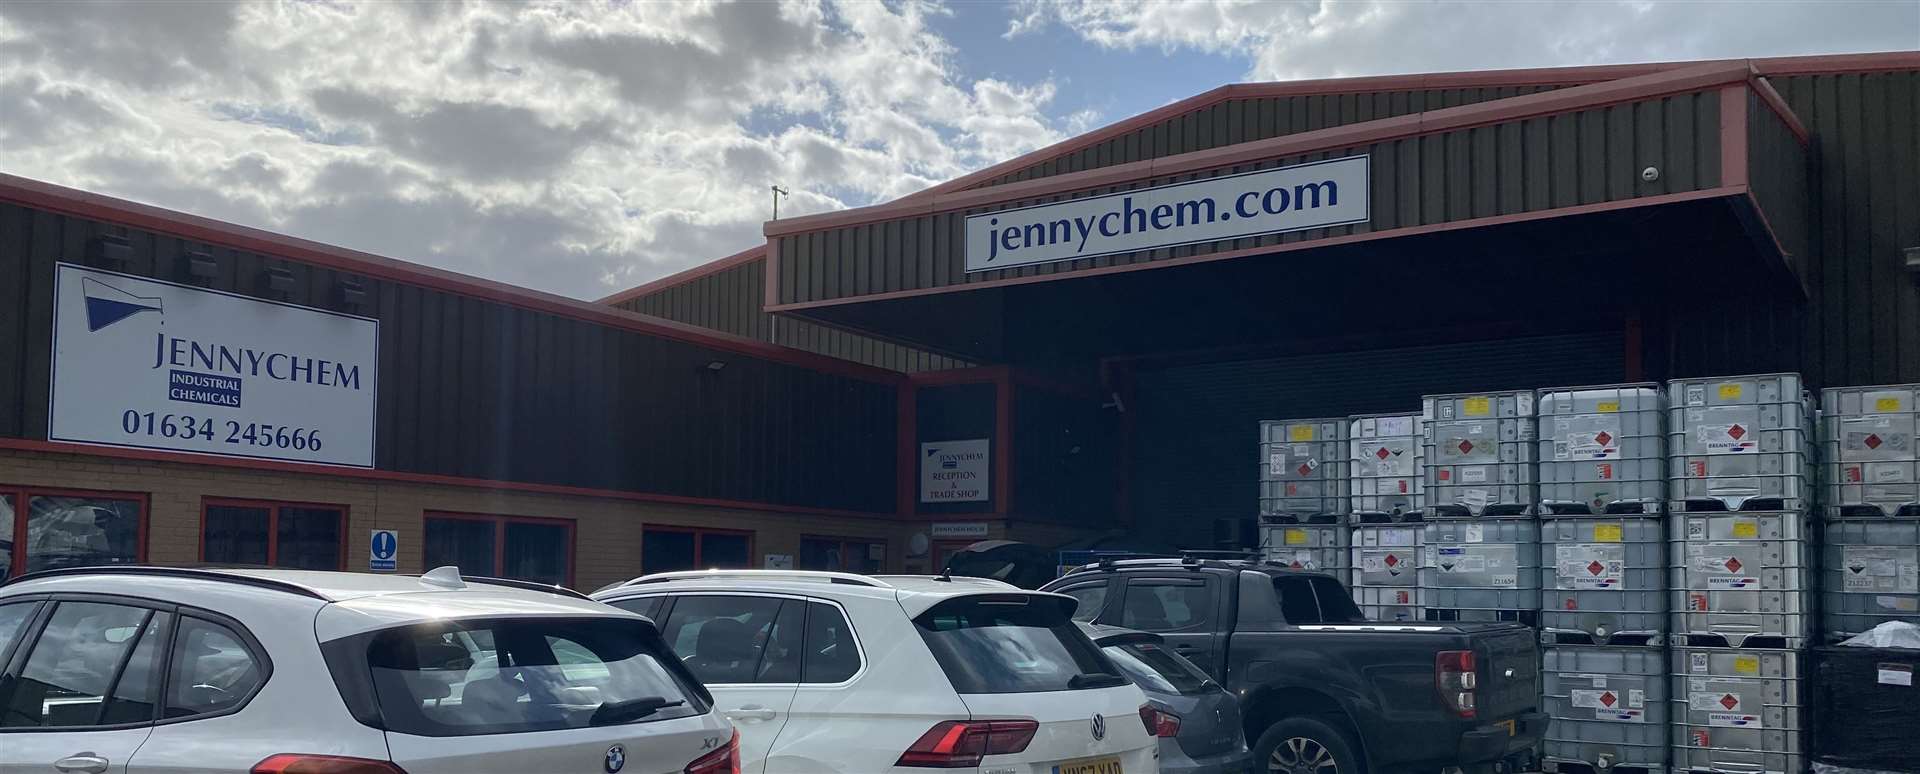 Jennychem is a family business in Snodland